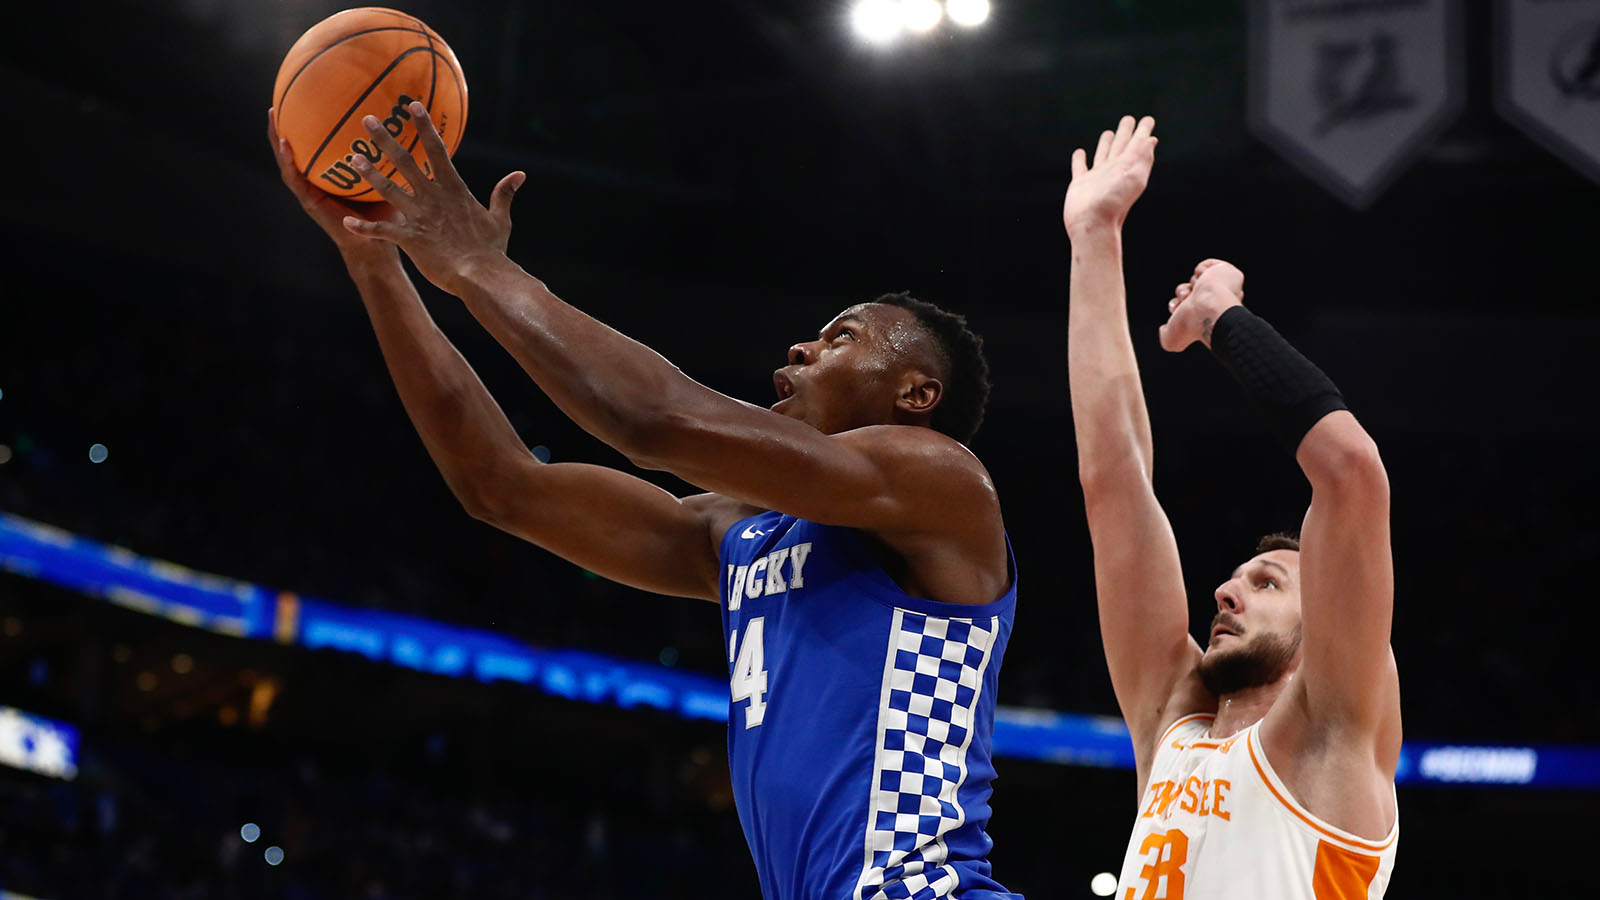 Kentucky Falls to Tennessee in SEC Semis